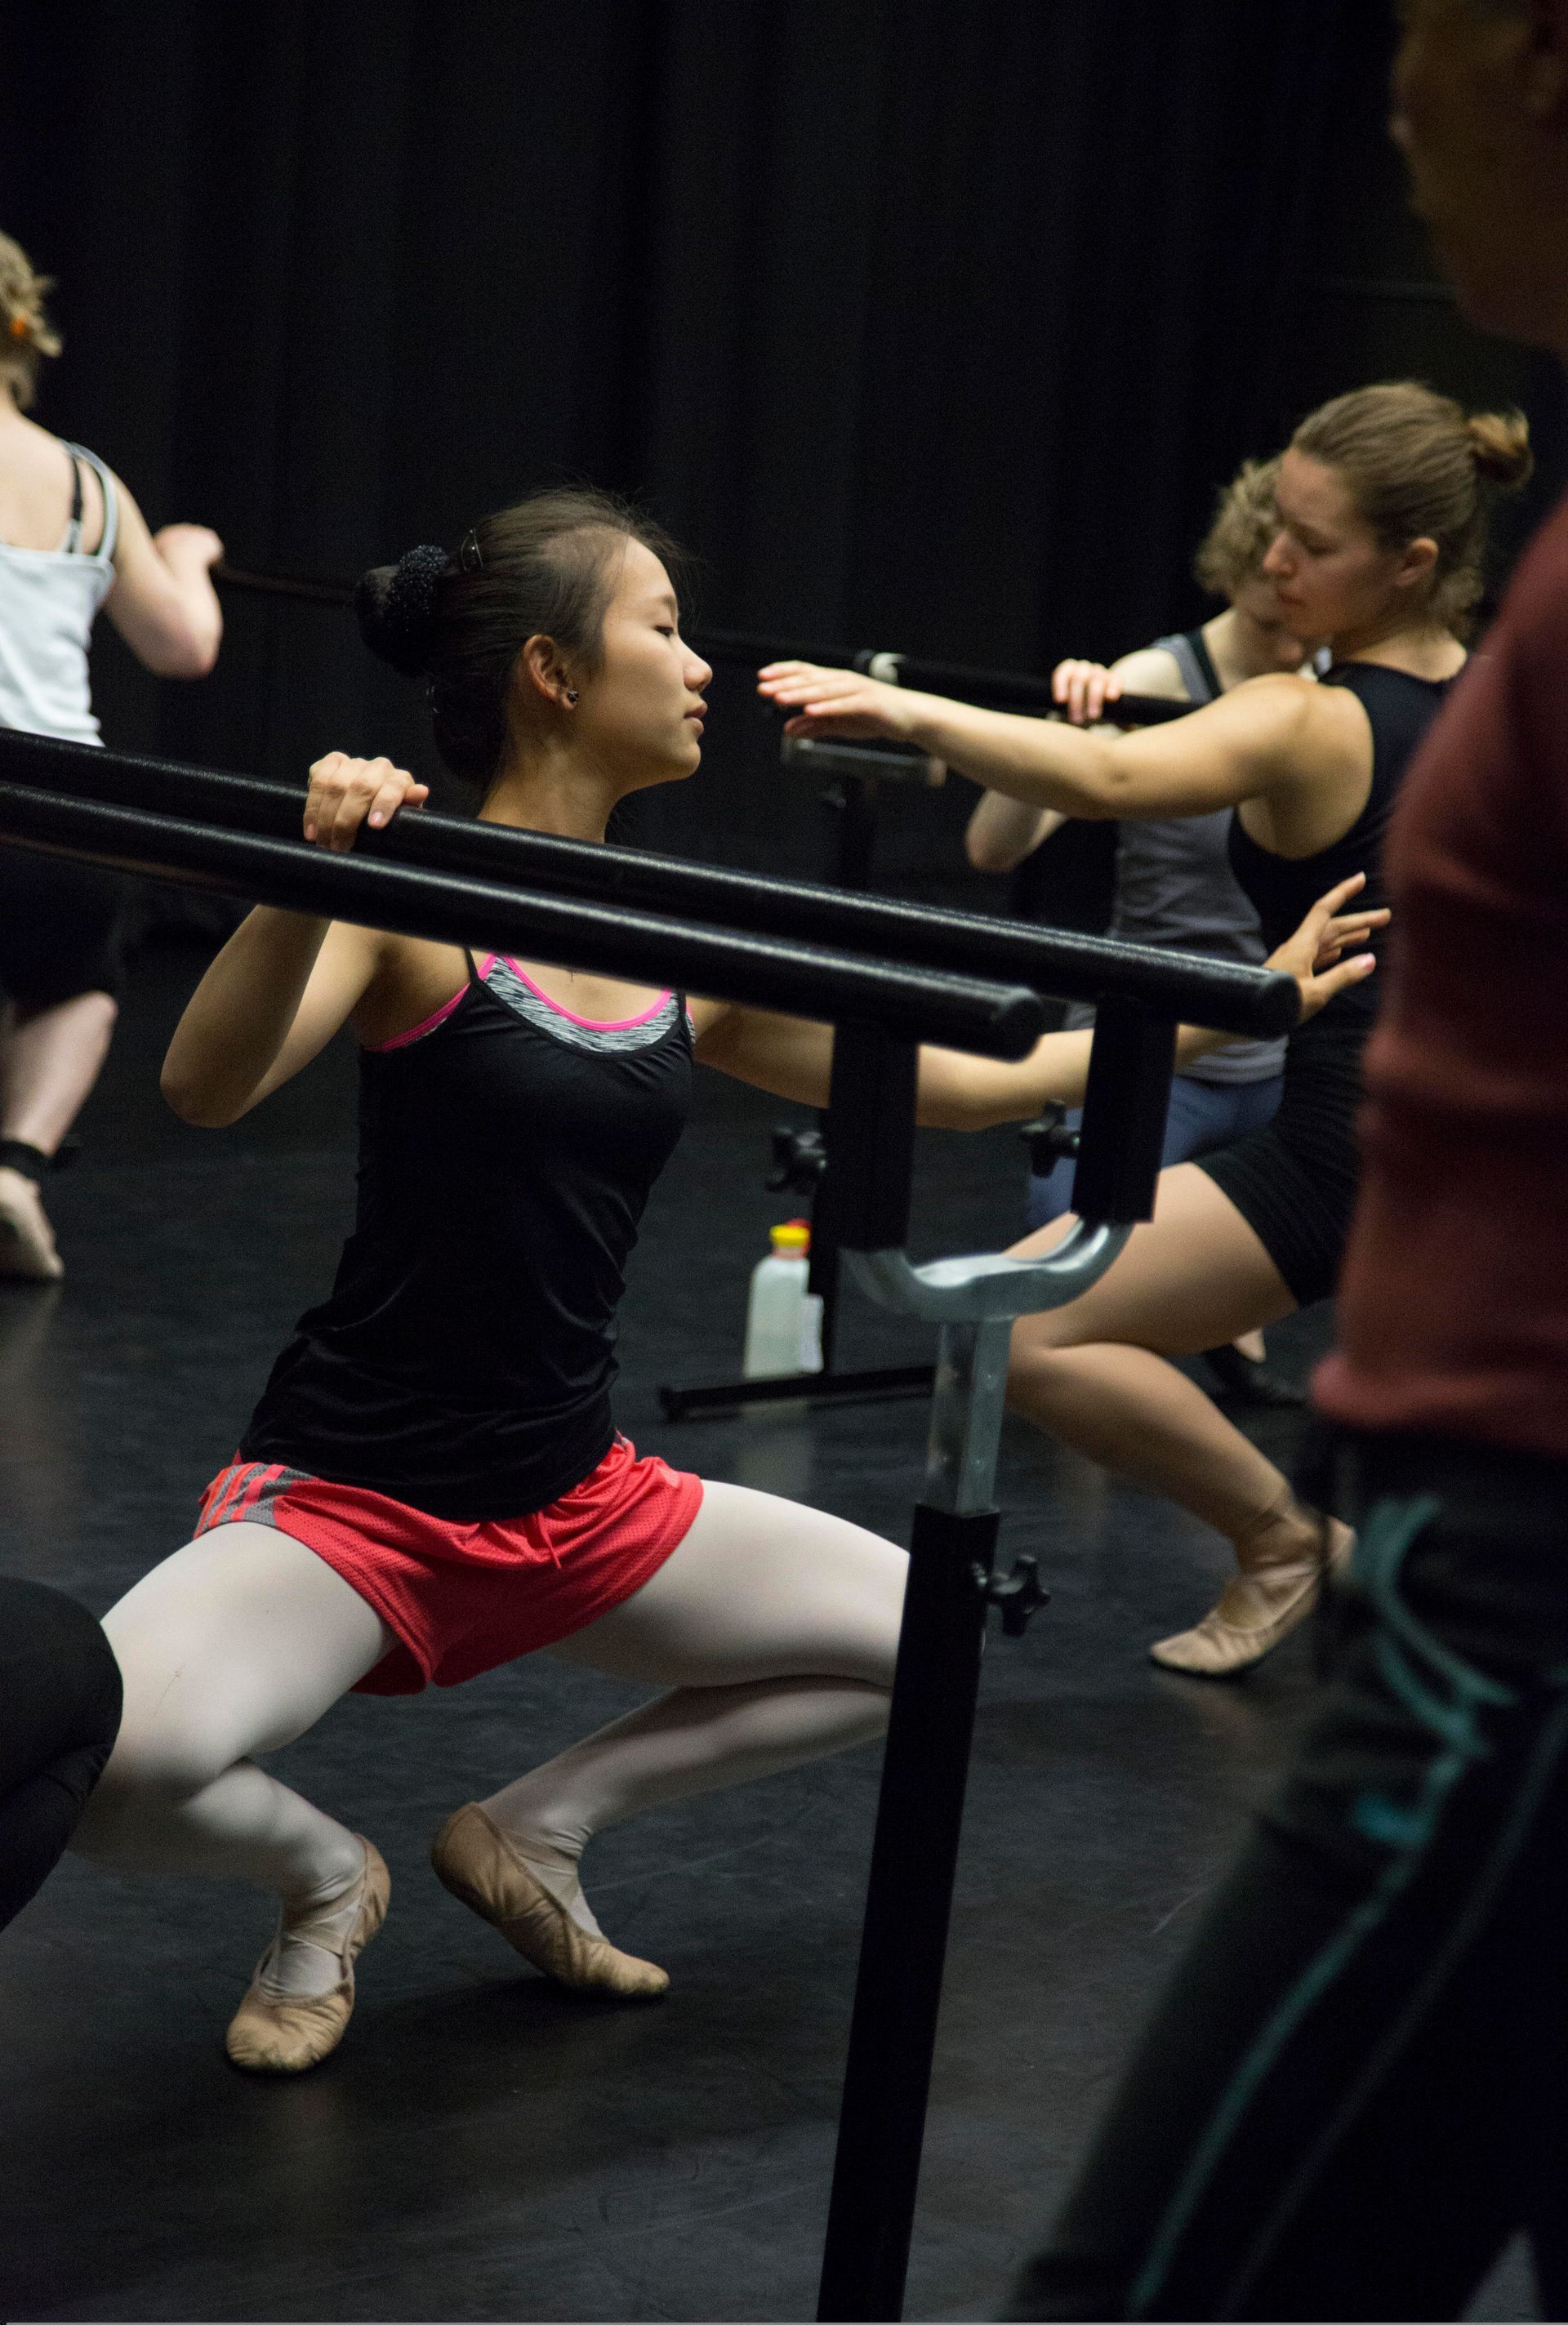 Woman practicing ballet technique at the barre in ballet class